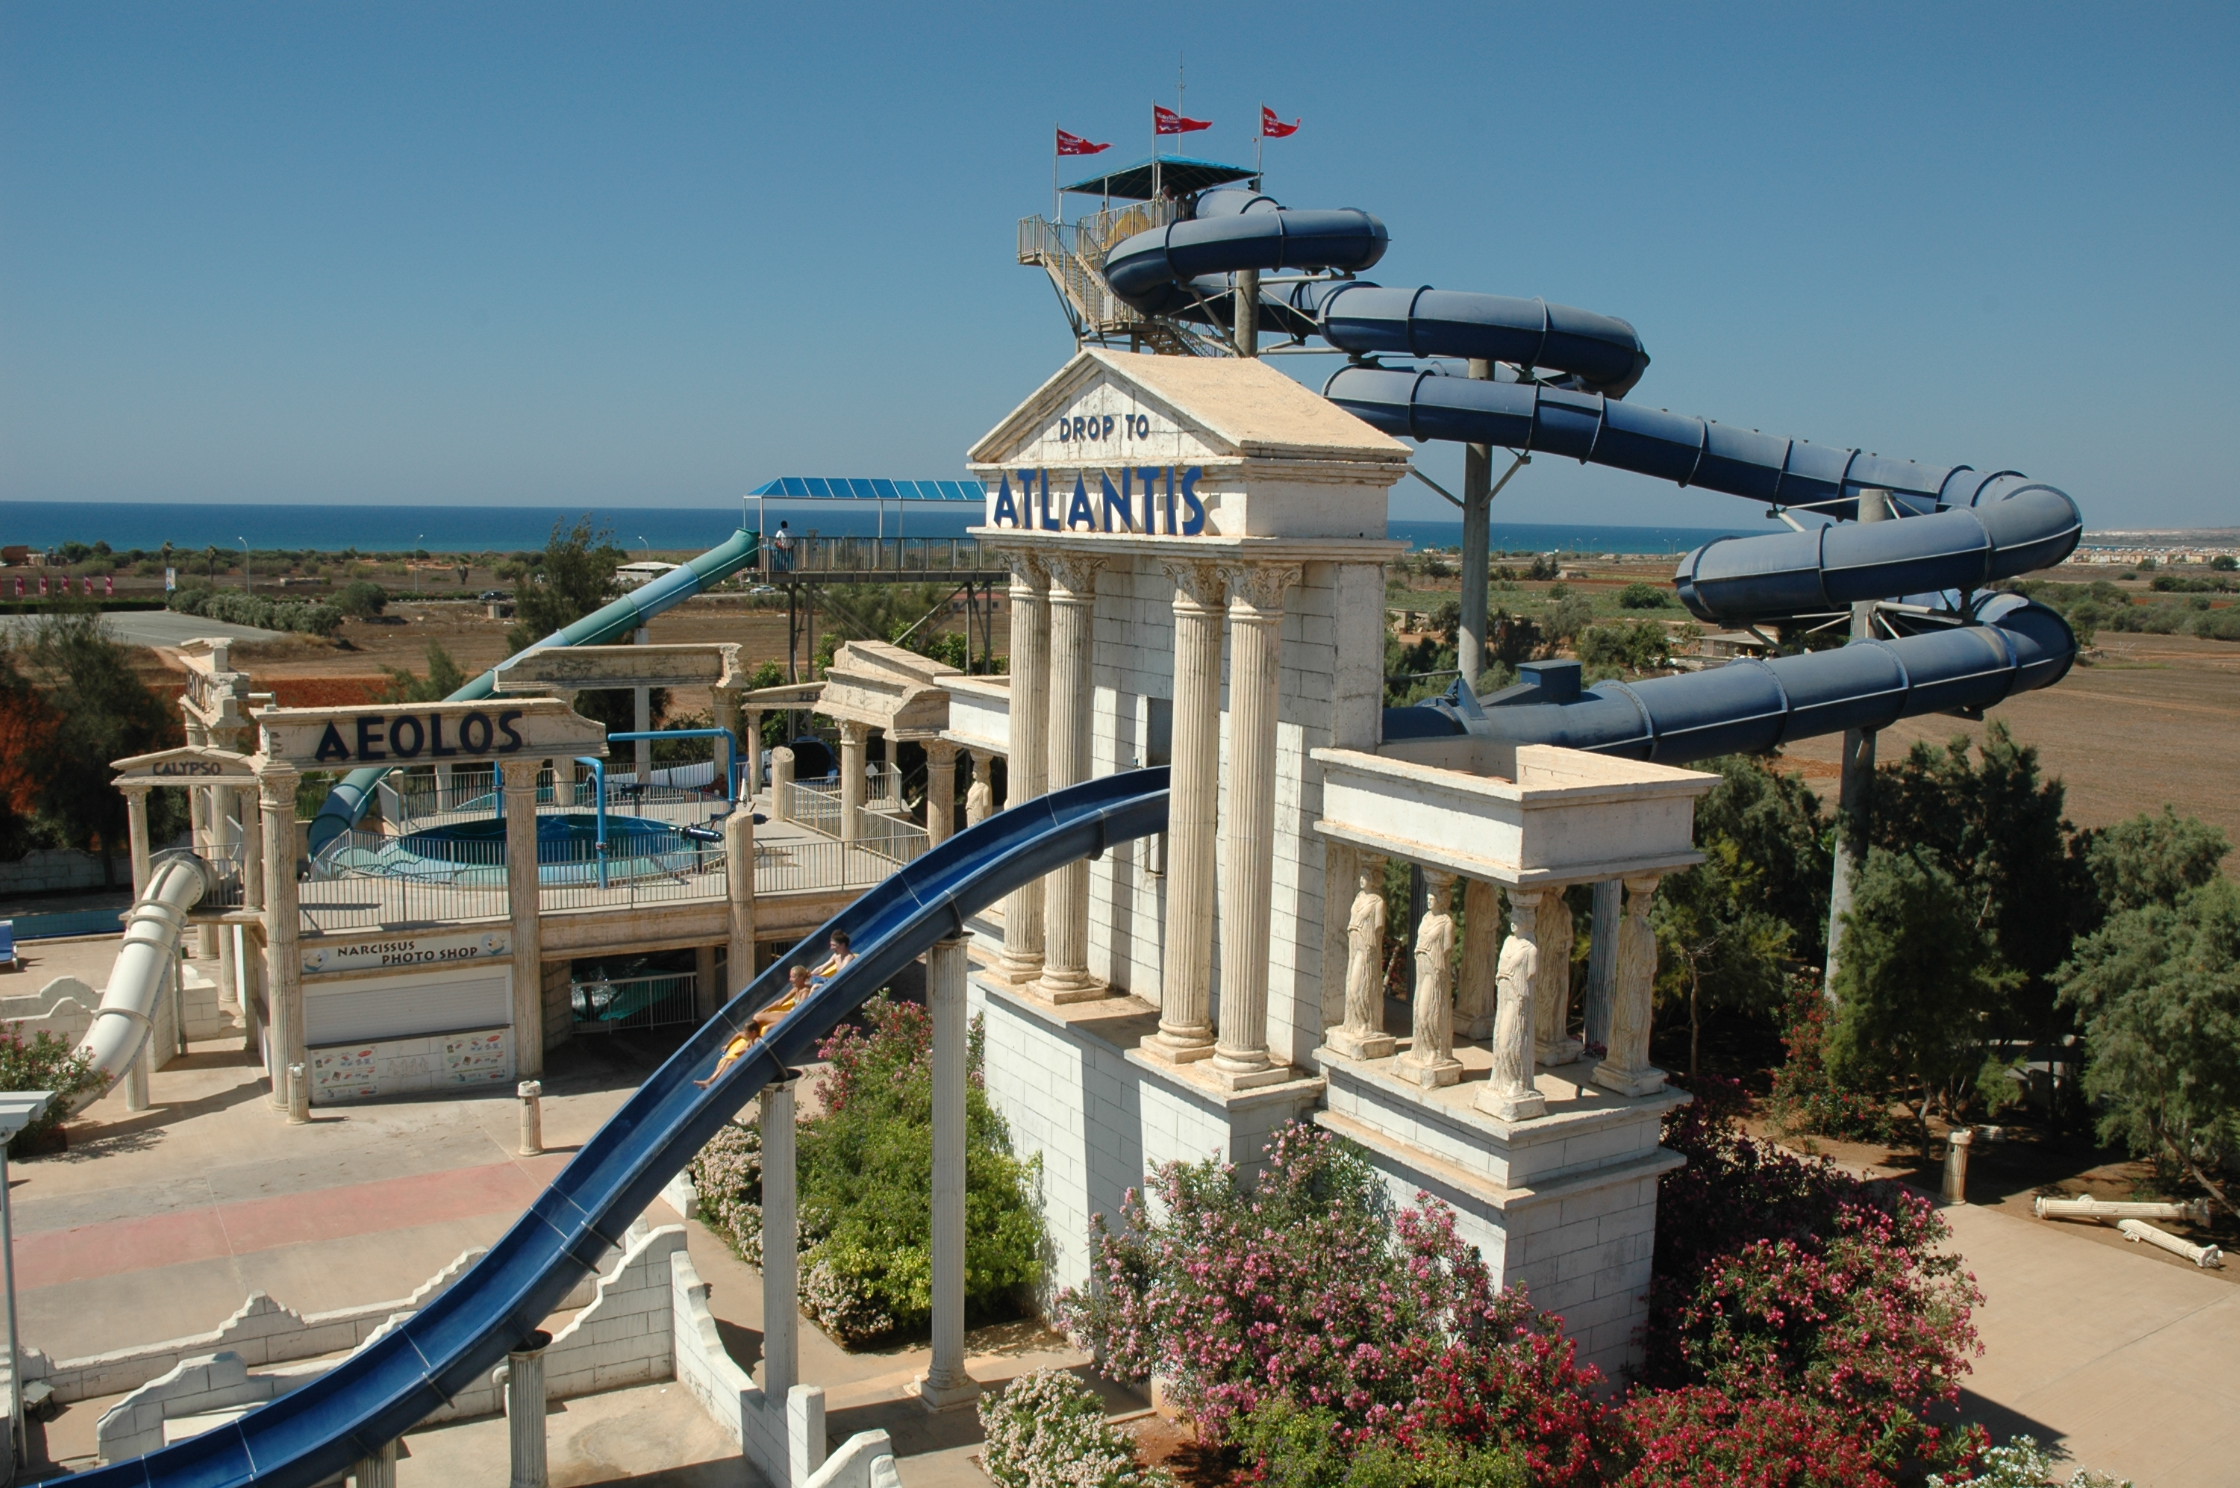 The water park in Ayia Napa